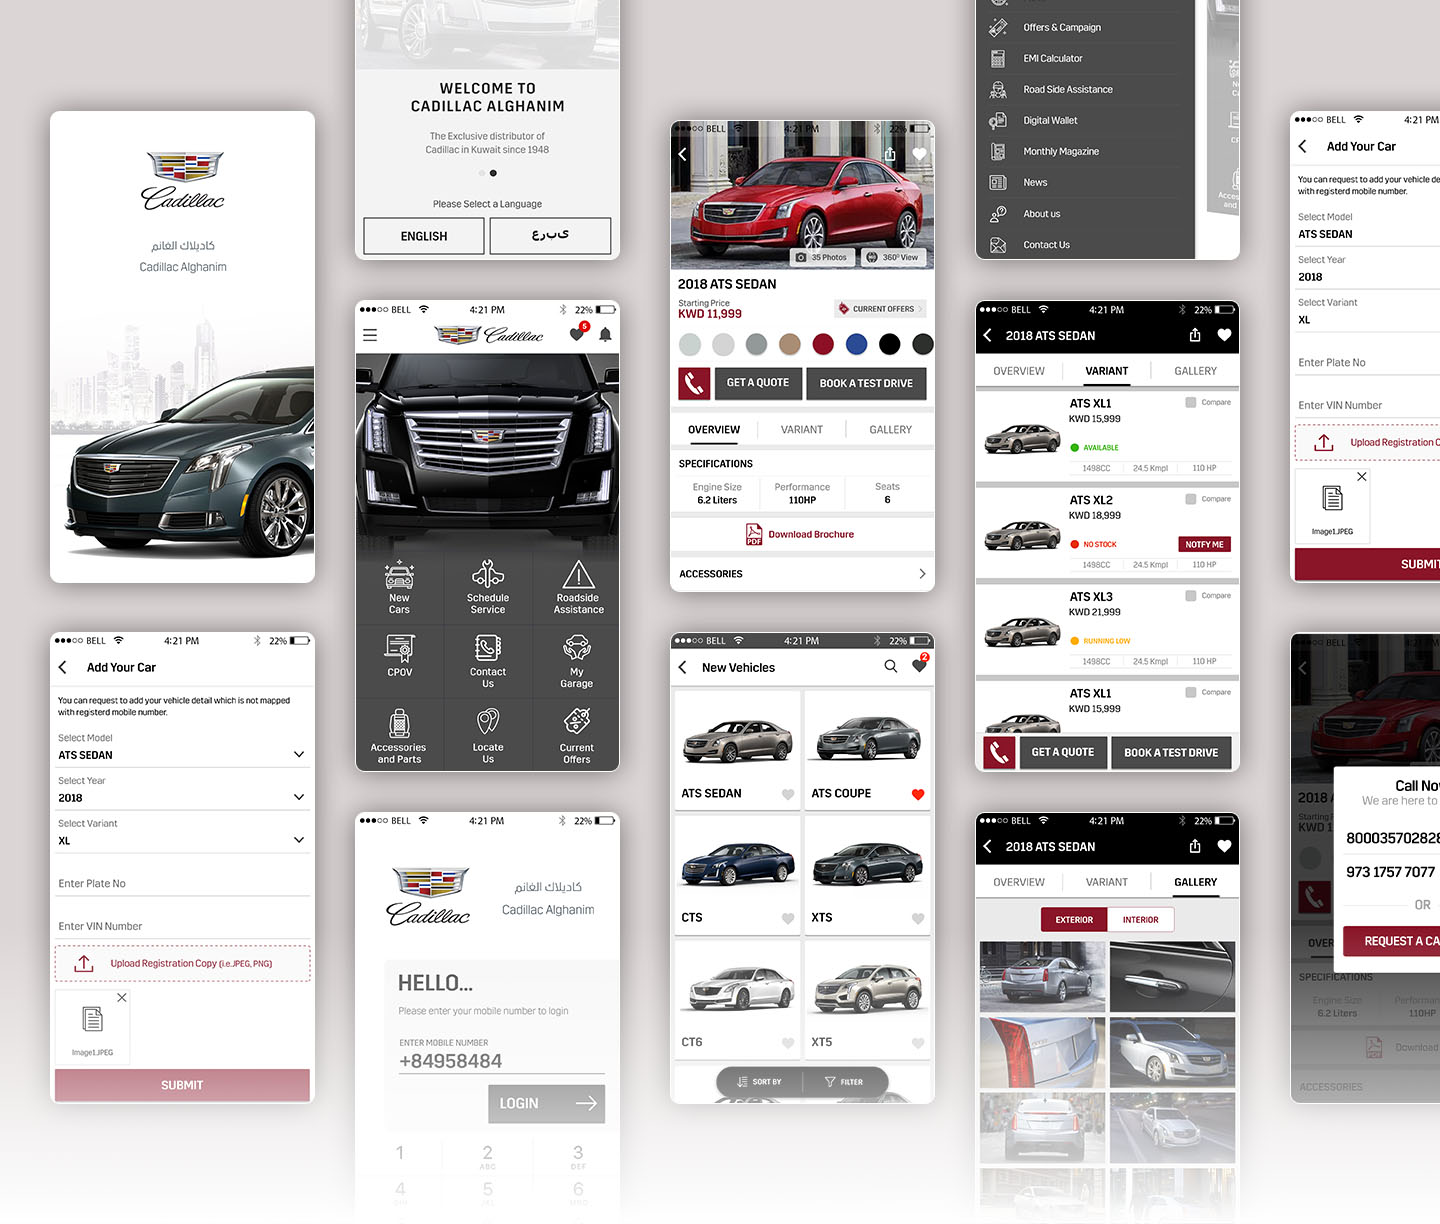 ui ux for best automotive experience